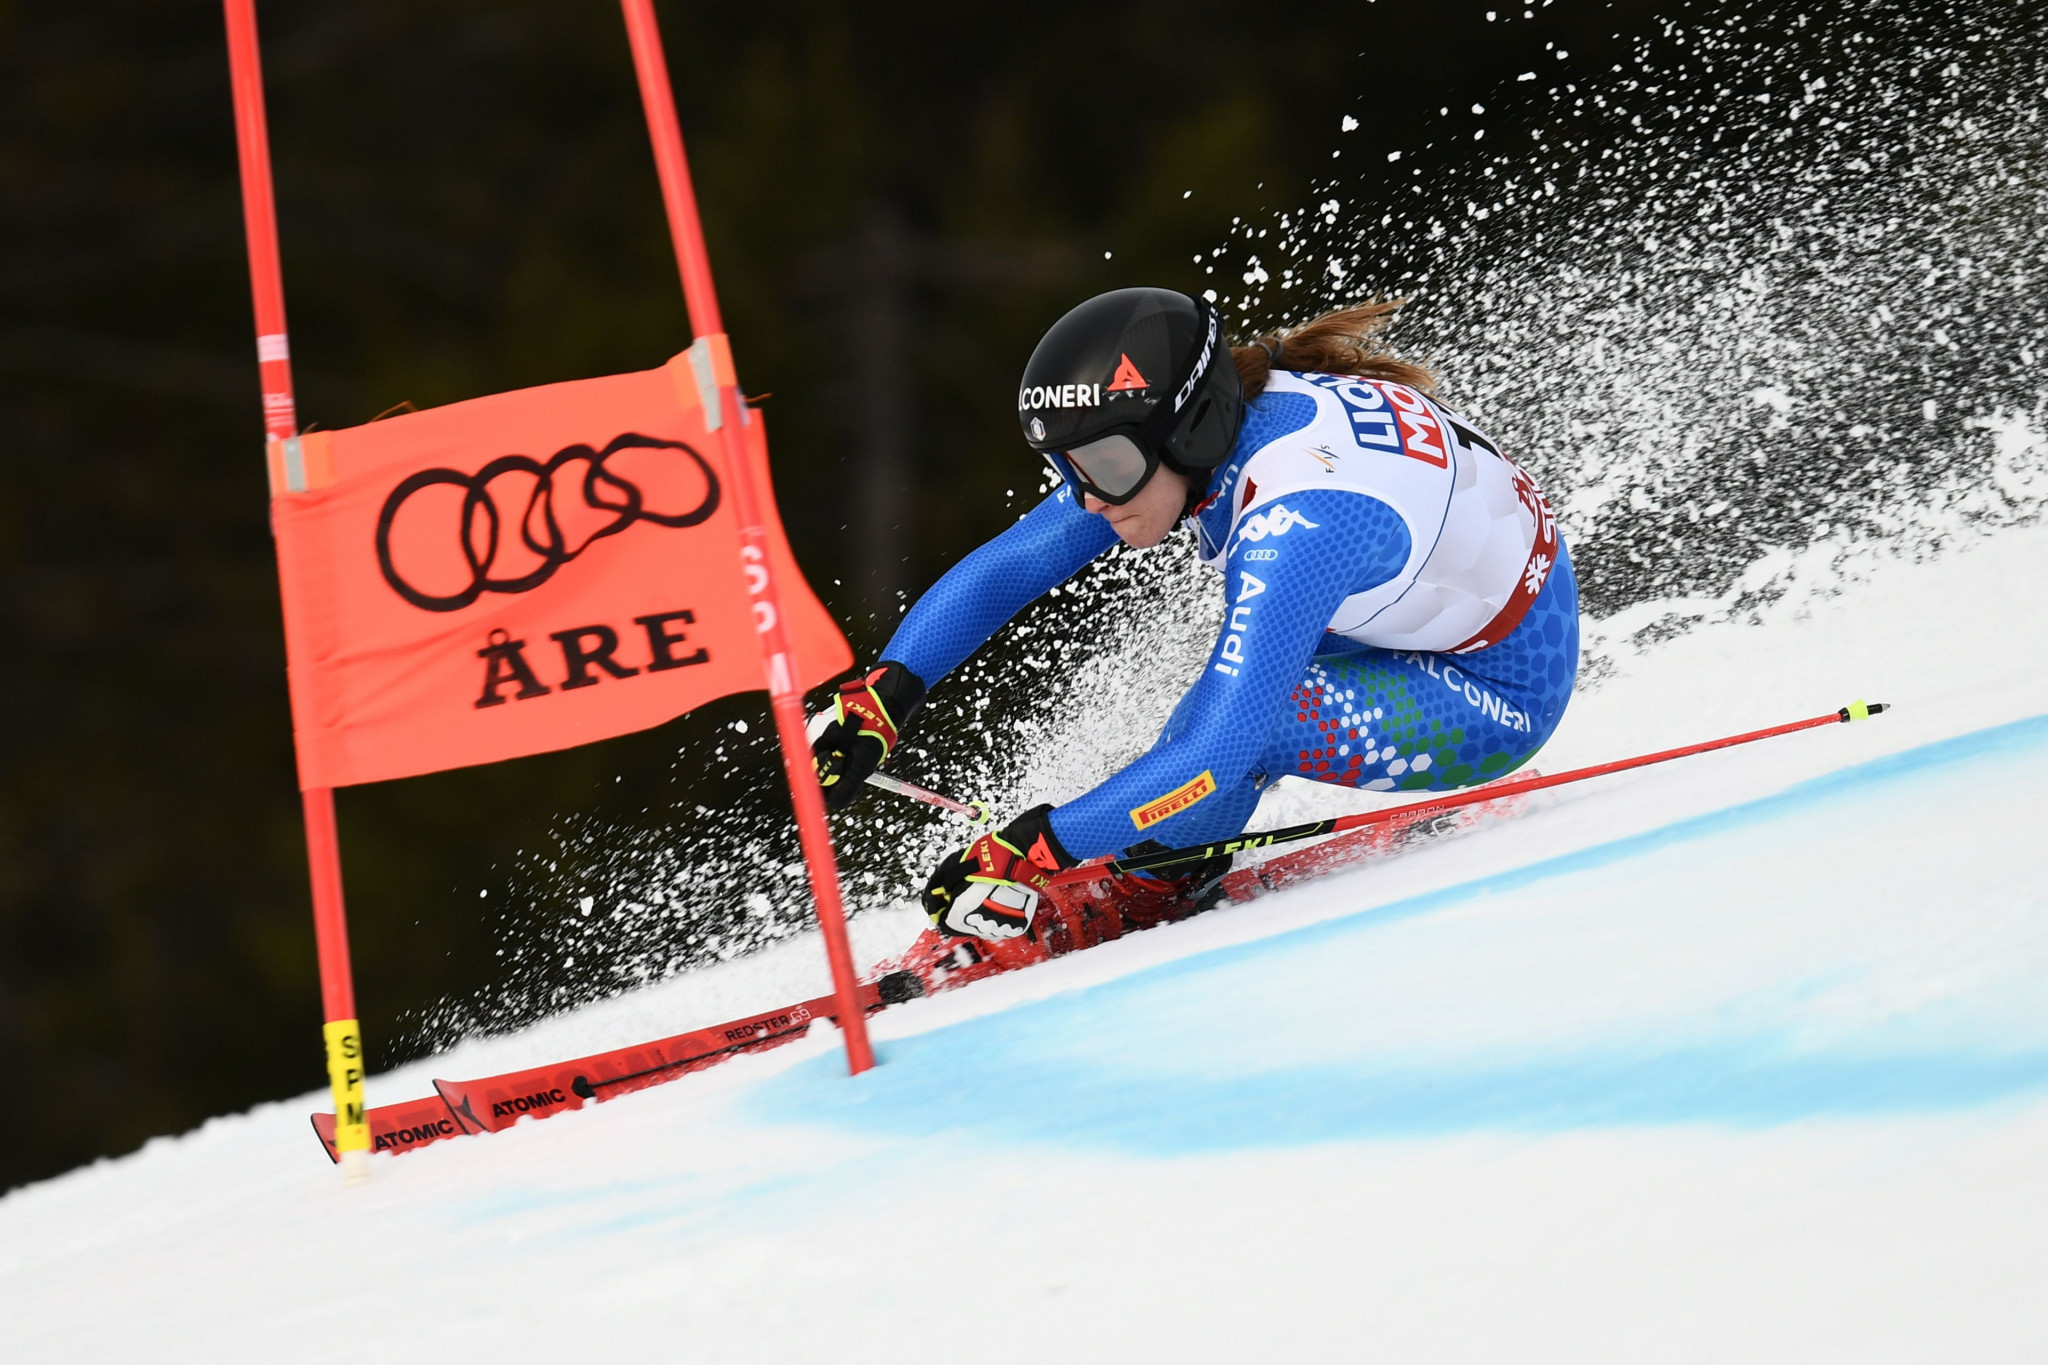 In total five athletes failed to finish their second runs, including the reigning Olympic downhill champion Sofia Goggia ©Getty Images